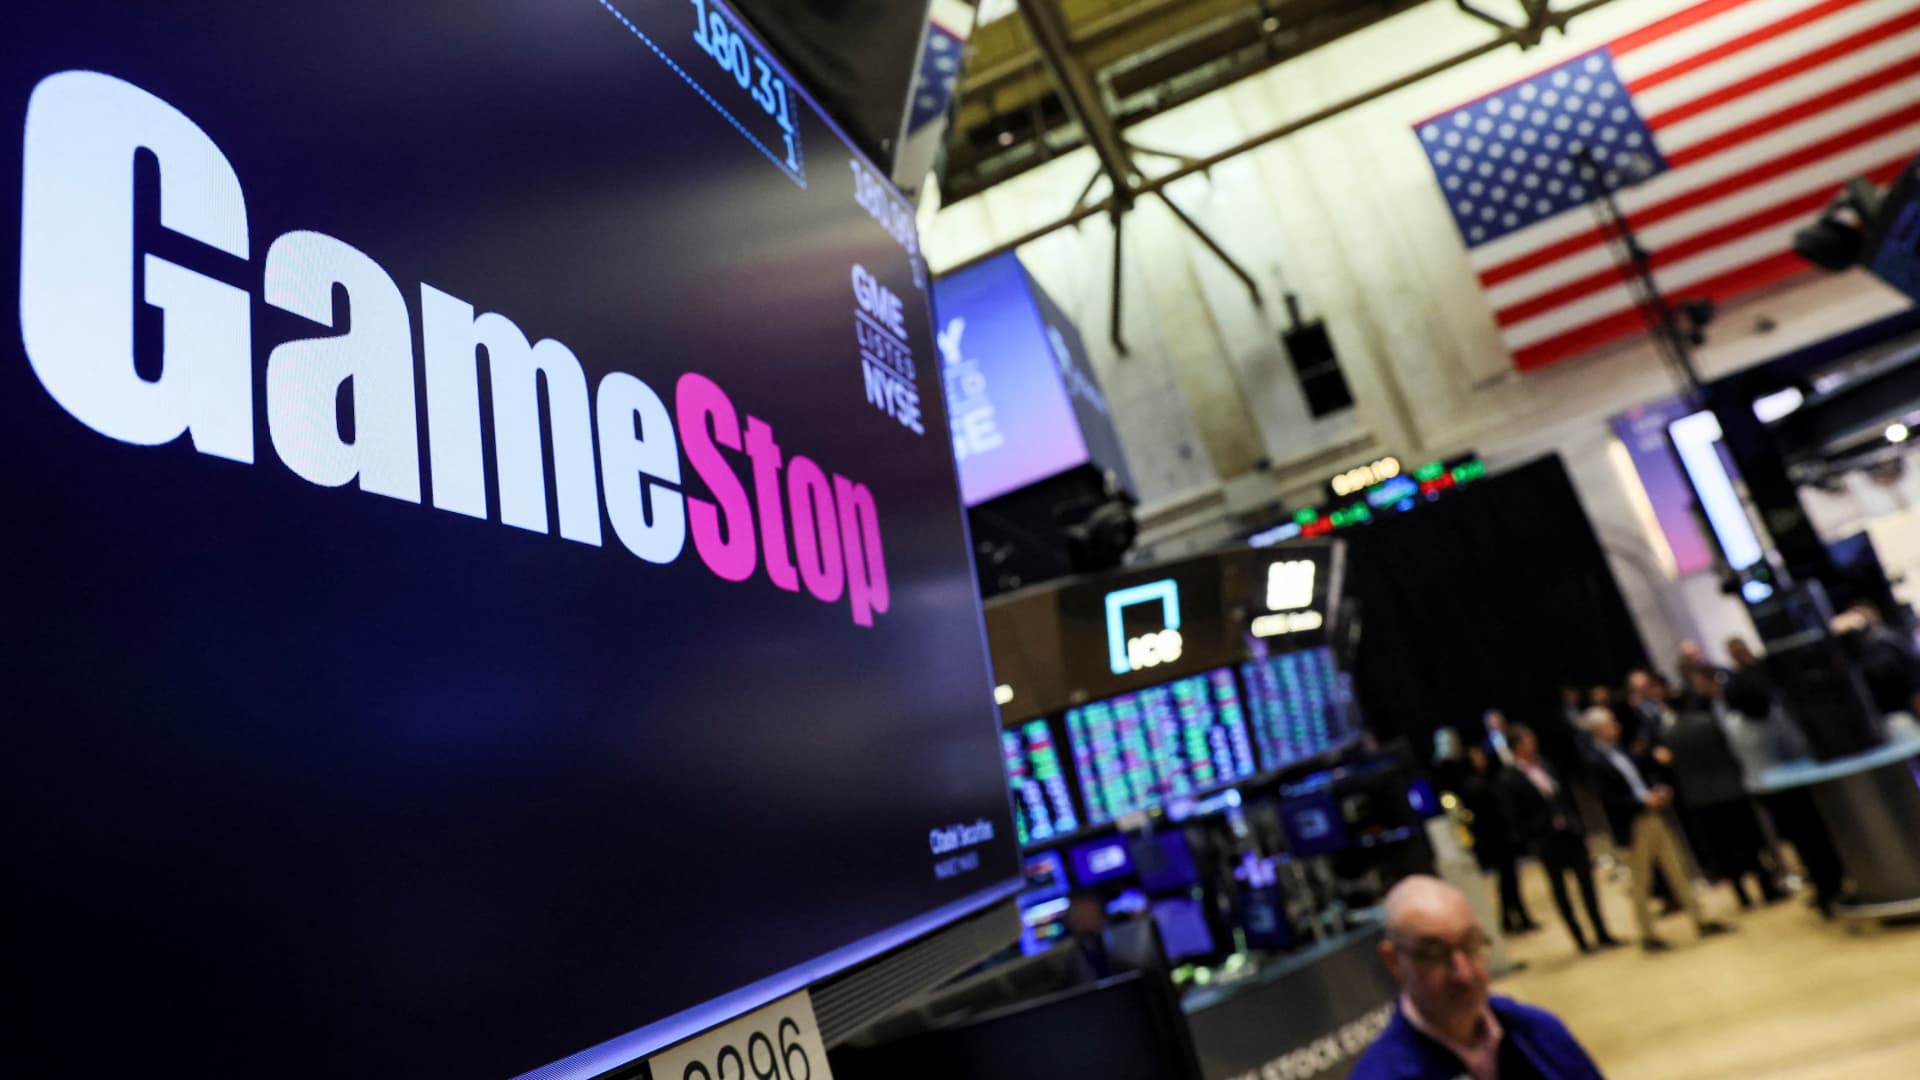 GameStop CFO is leaving the company, retailer announces layoffs